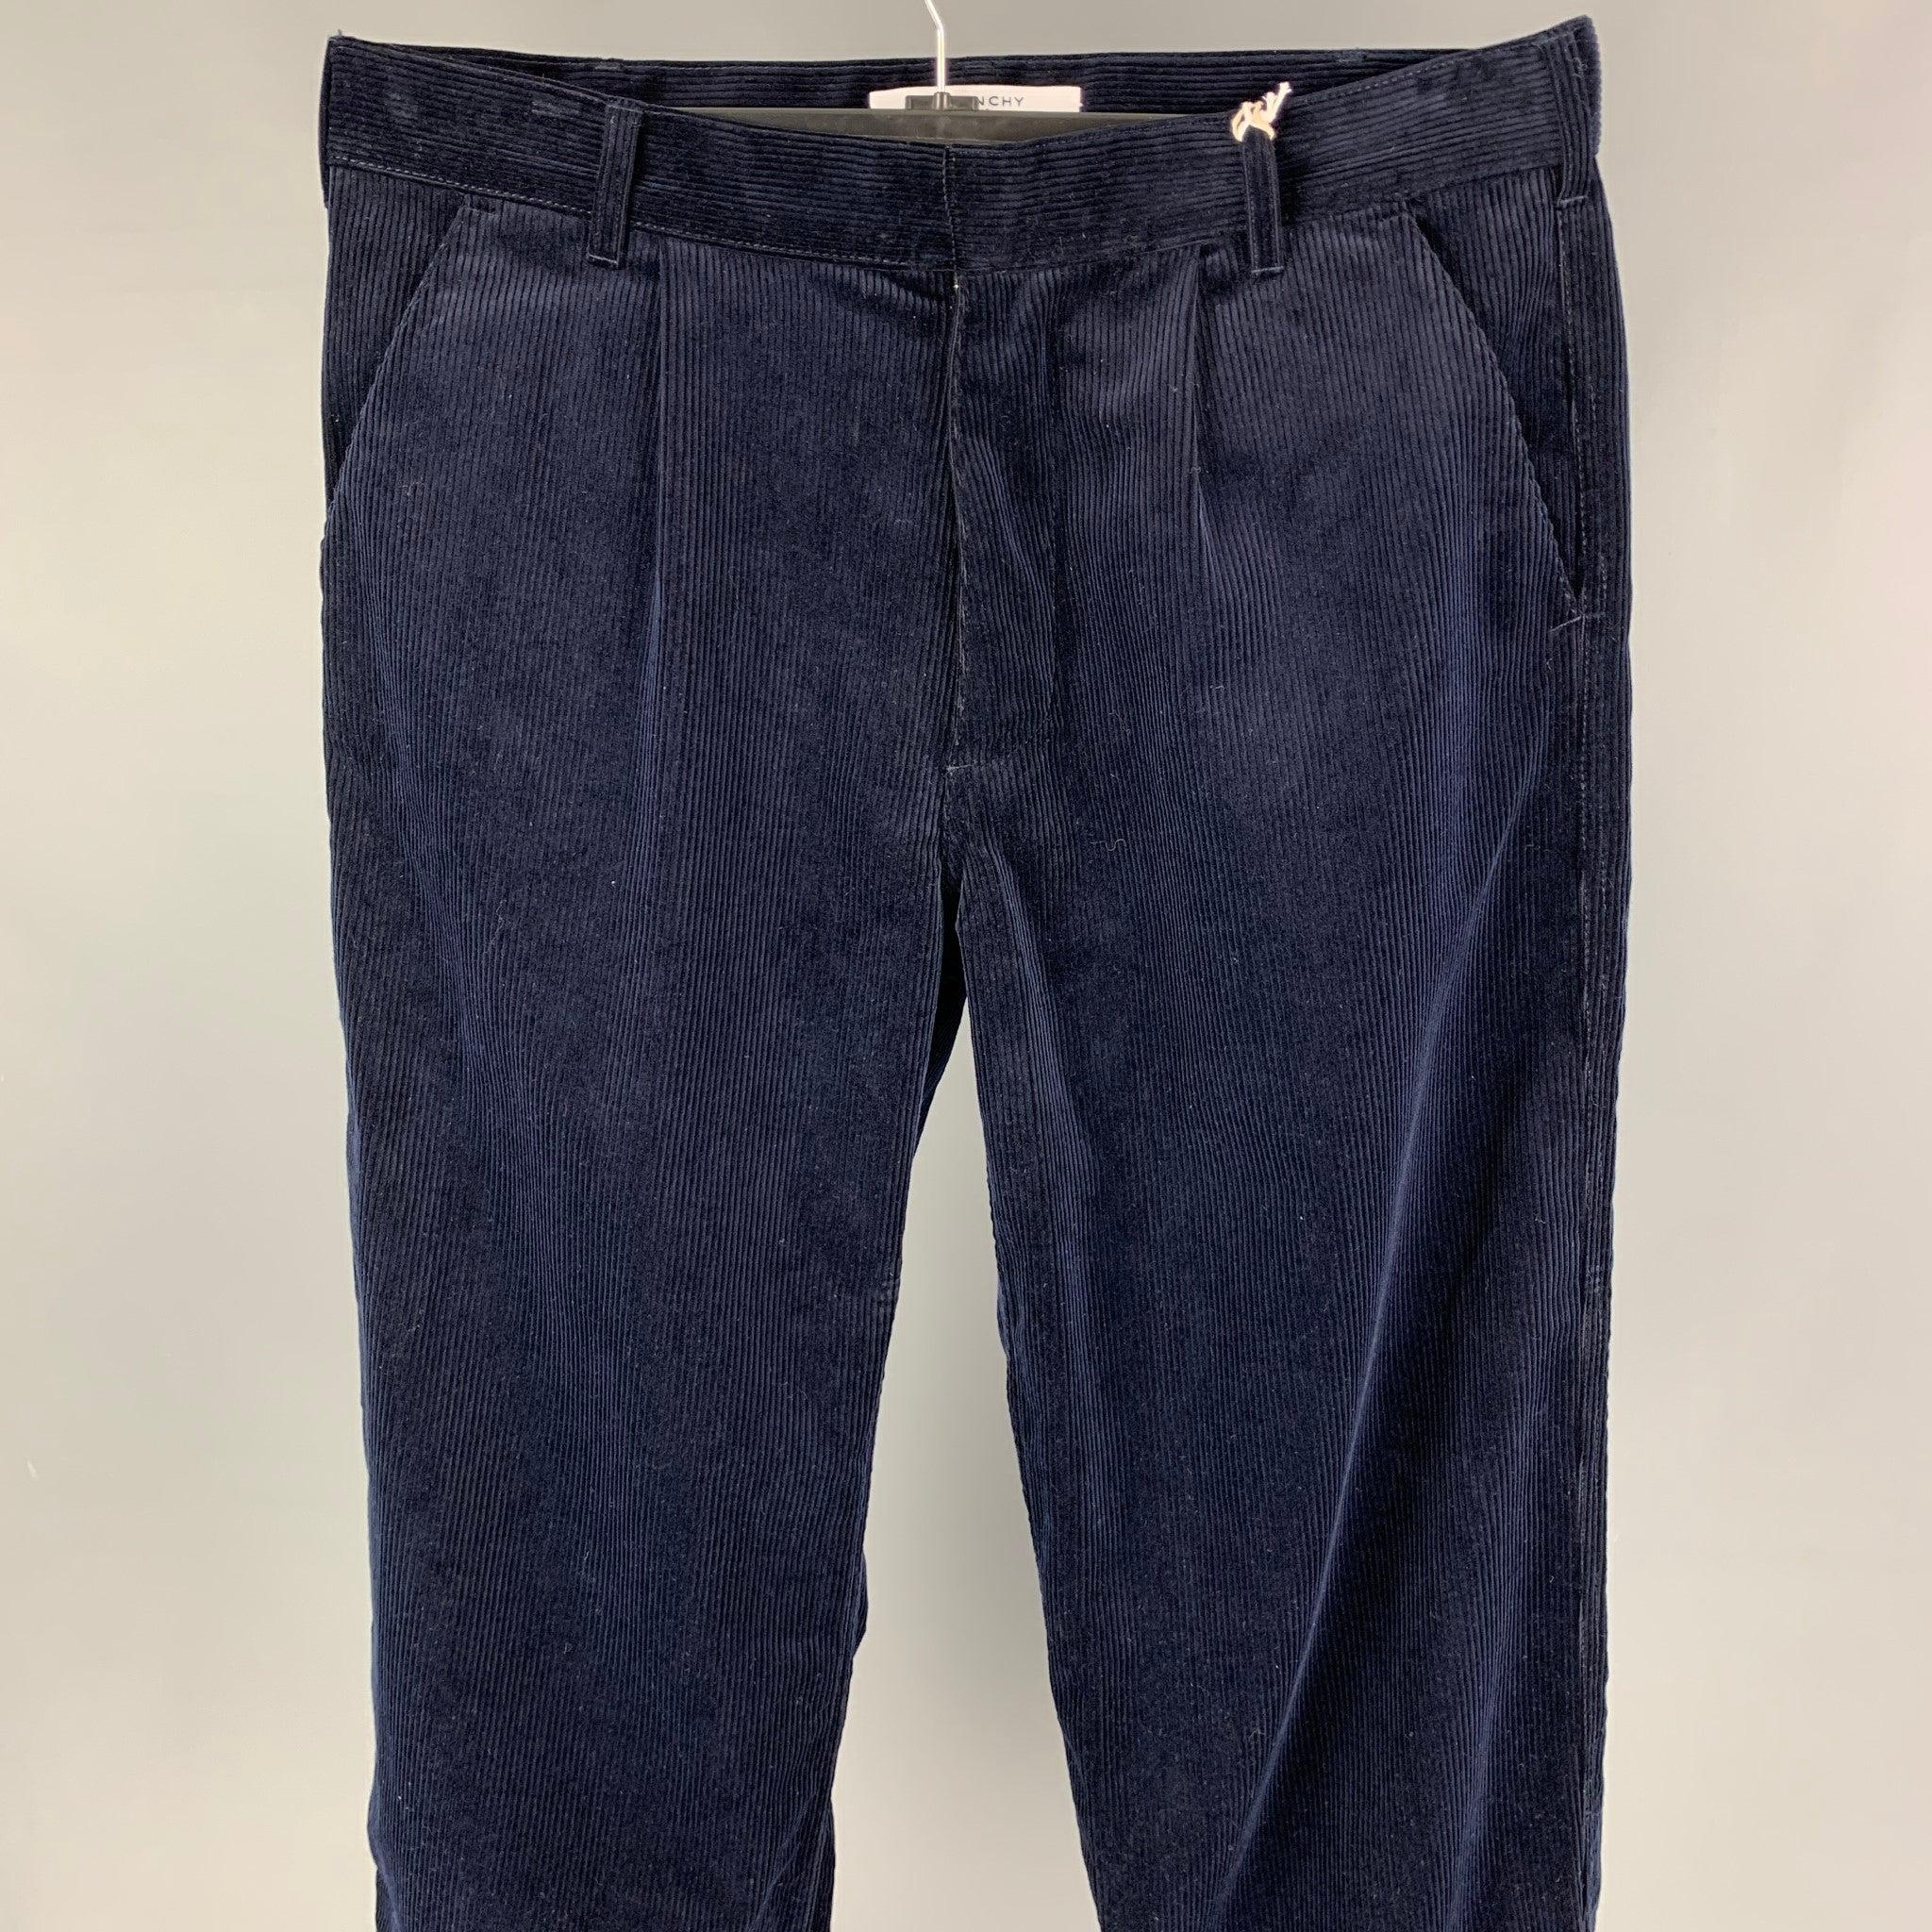 GIVENCHY casual pants comes in a midnight blue cotton corduroy featuring a tapered leg, zipped cuffs, 3GV rubber tag, front tab, and a zip fly closure.
New with Tags.
 

Marked:   48 

Measurements: 
  Waist: 32 inches  Rise: 12 inches  Inseam: 30